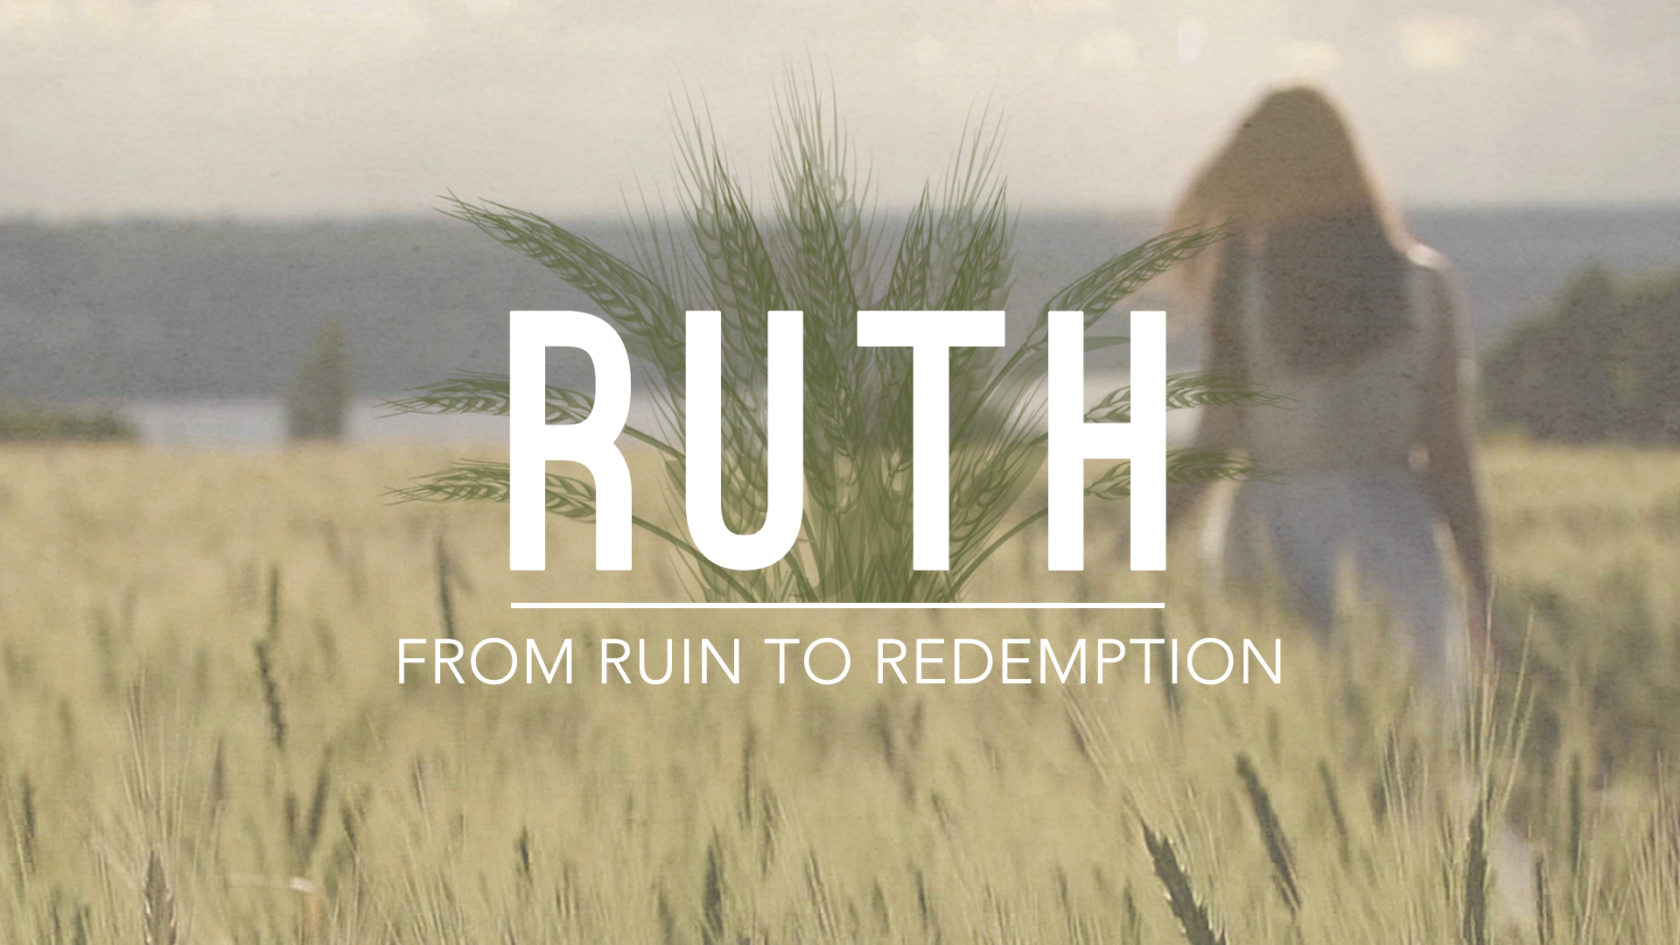 A Study of Ruth Teaches Us to Seek to Care for the Poor and Vulnerable